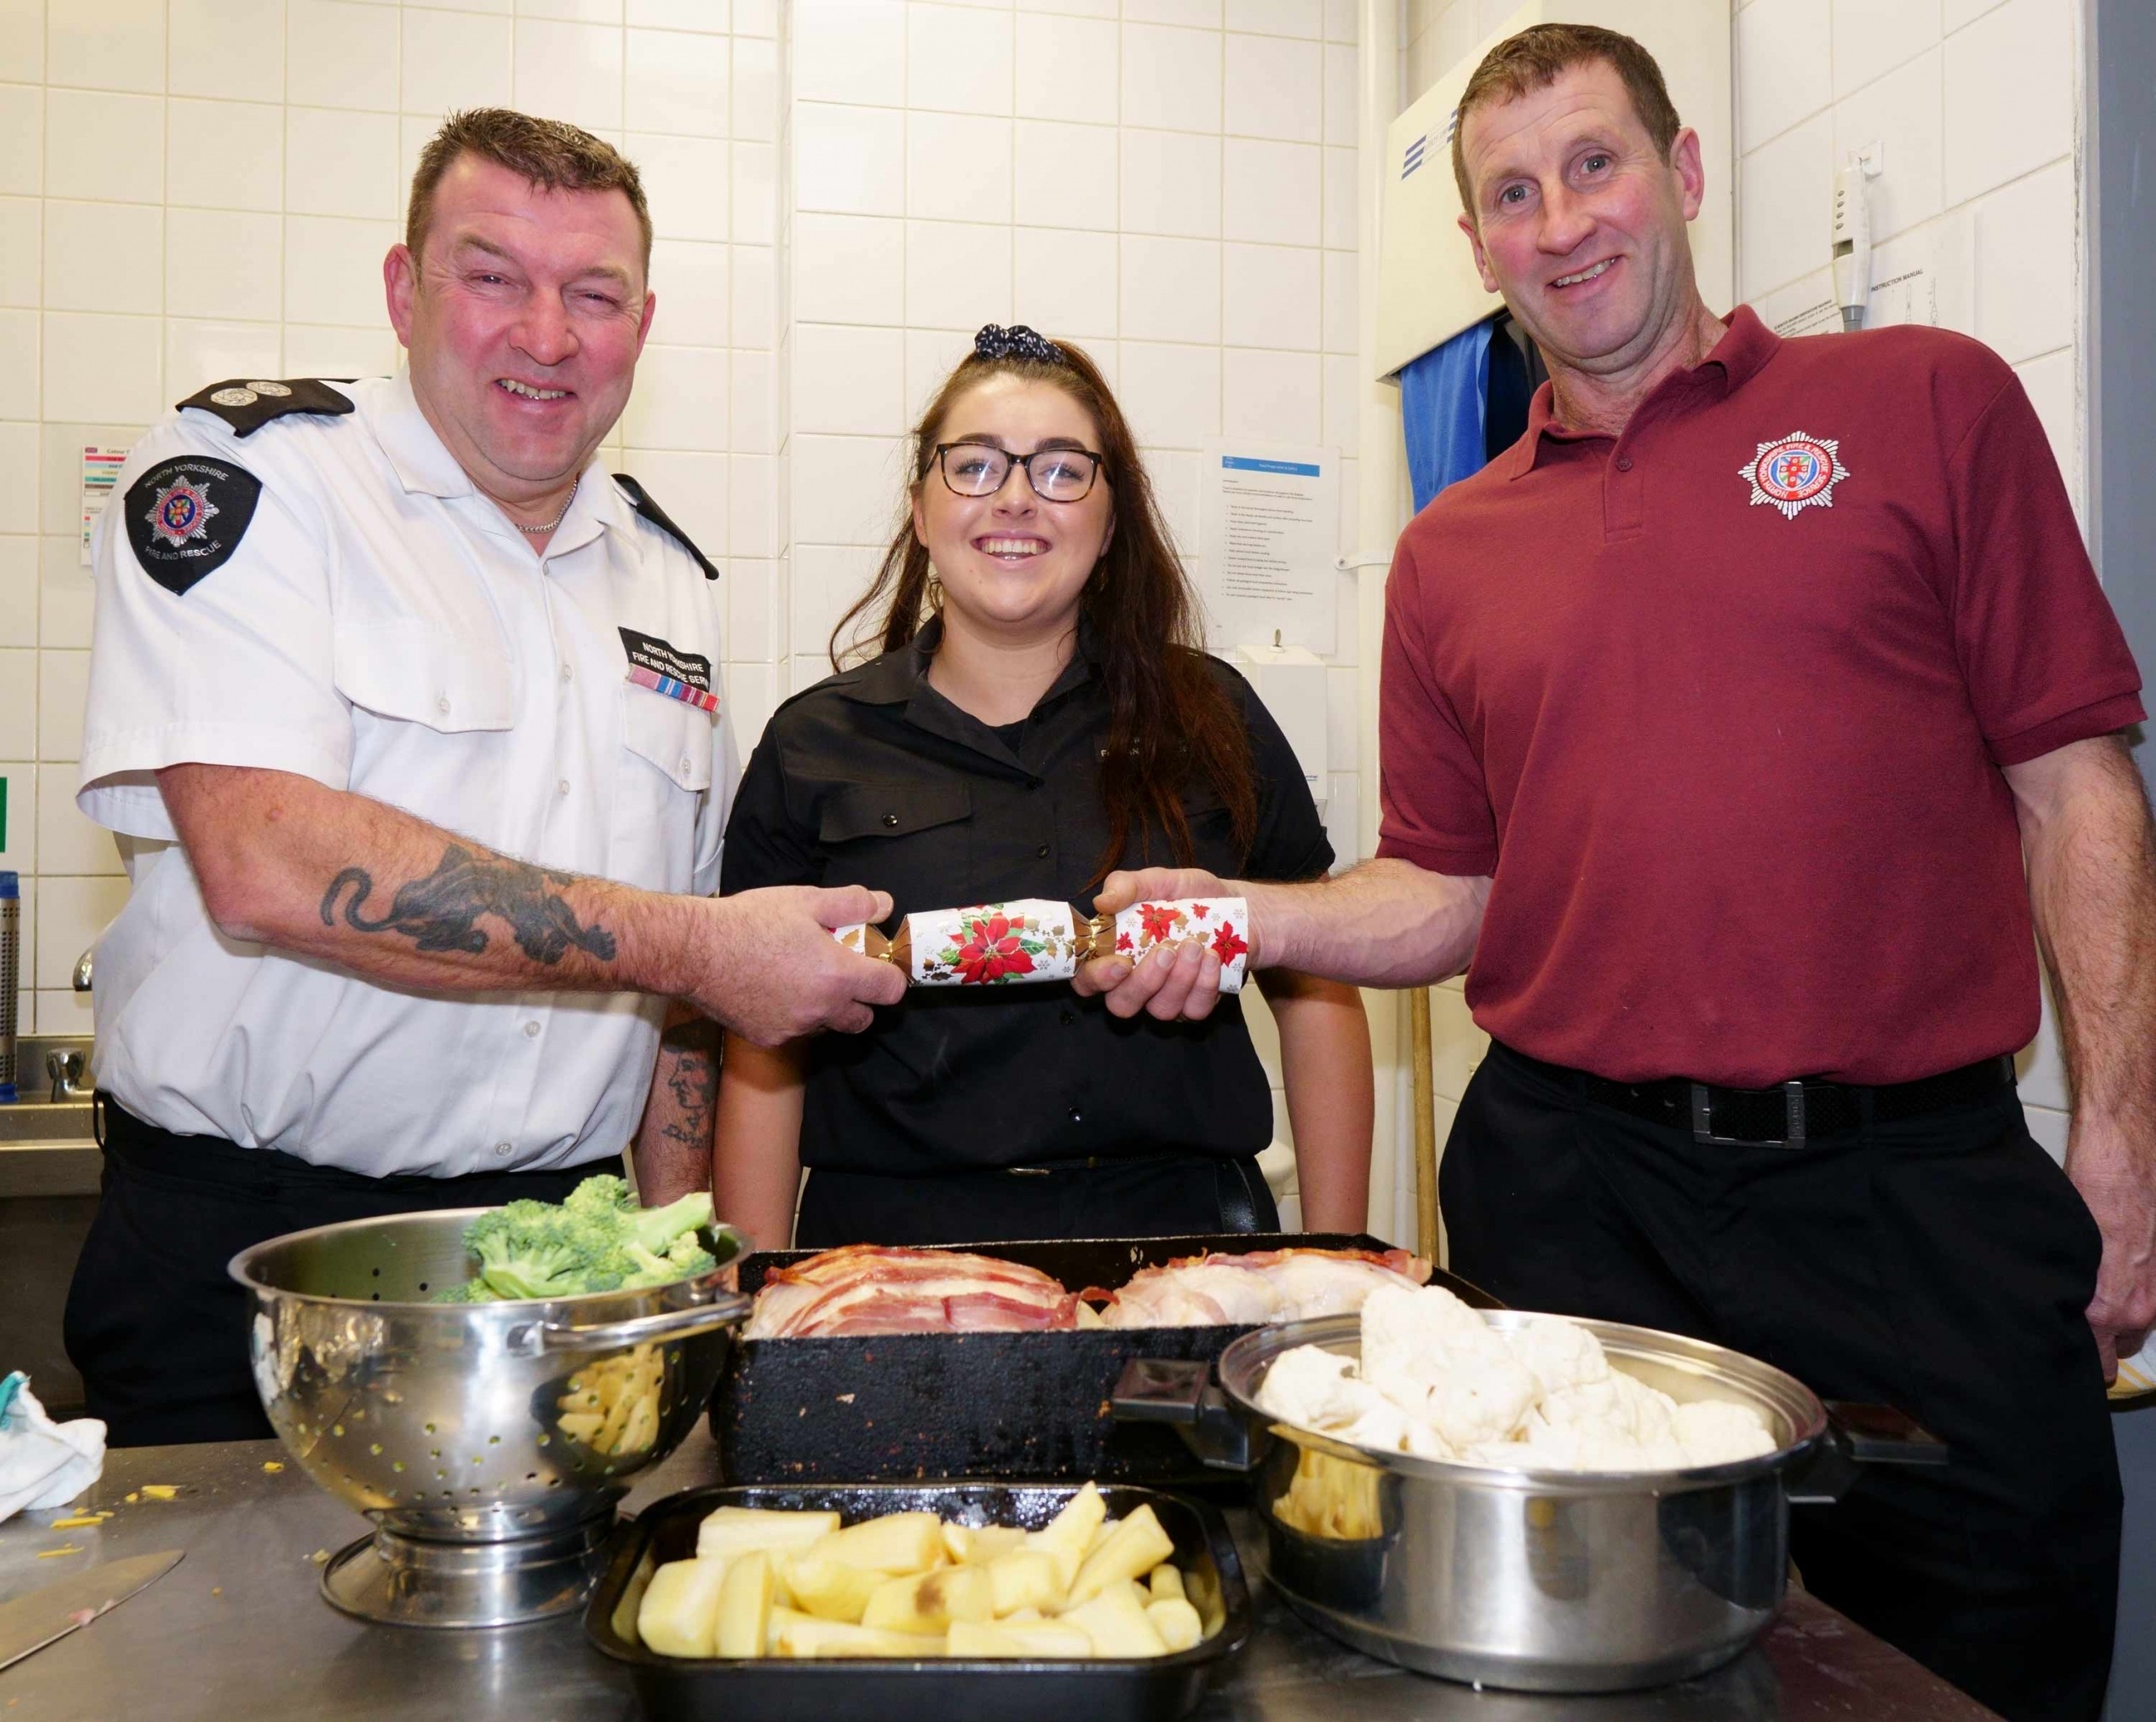 Watch Manager, Bruce Reid, Community Safety Officer, Fran Tattersal with Fire Fighter, Alan Brown